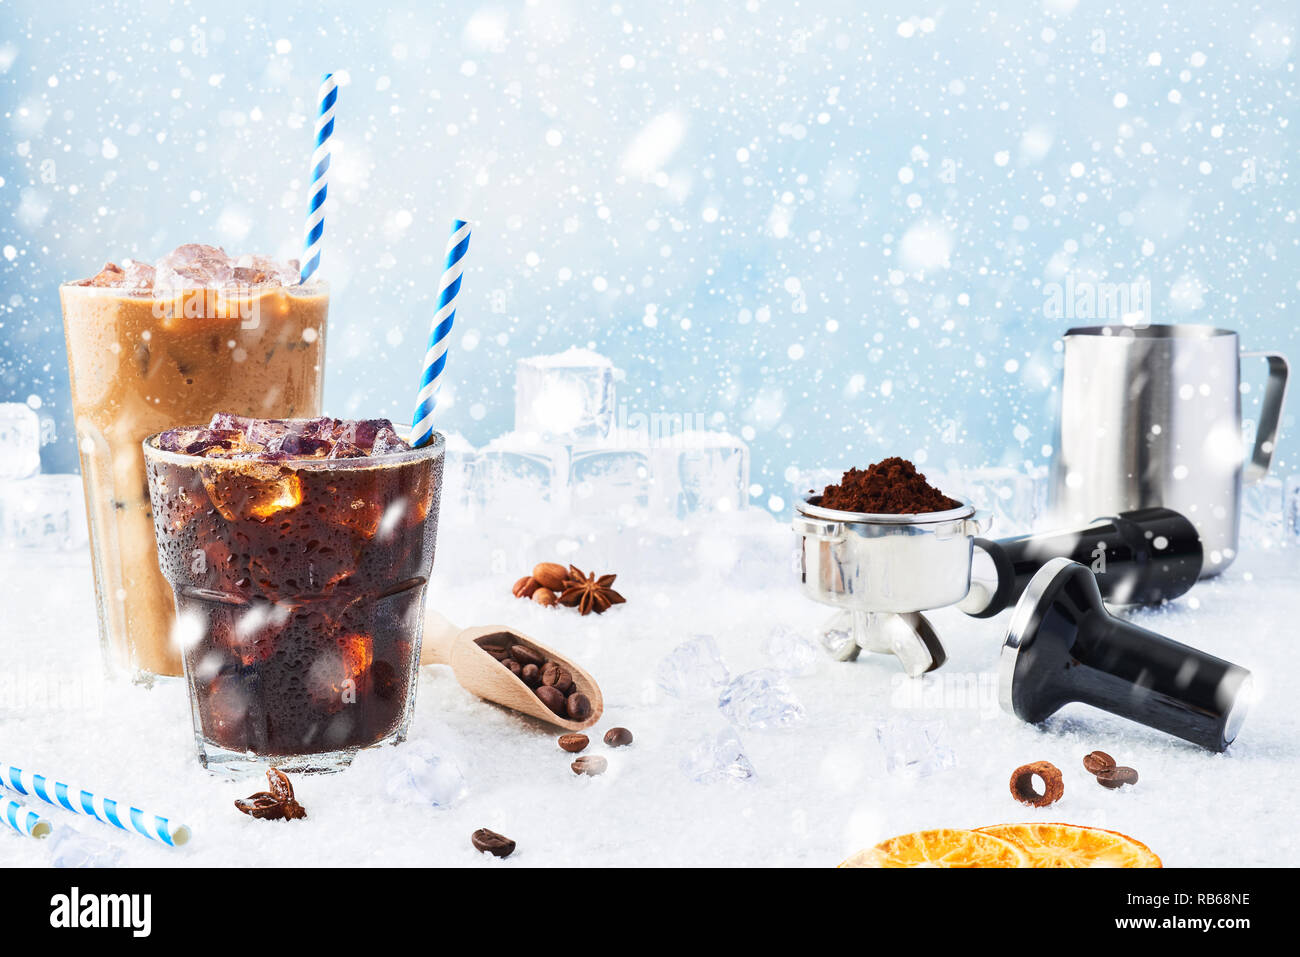 Winter drink iced coffee in a glass and ice coffee with cream in a tall glass surrounded by ice, coffee beans, portafilter, tamper, milk jug and vario Stock Photo